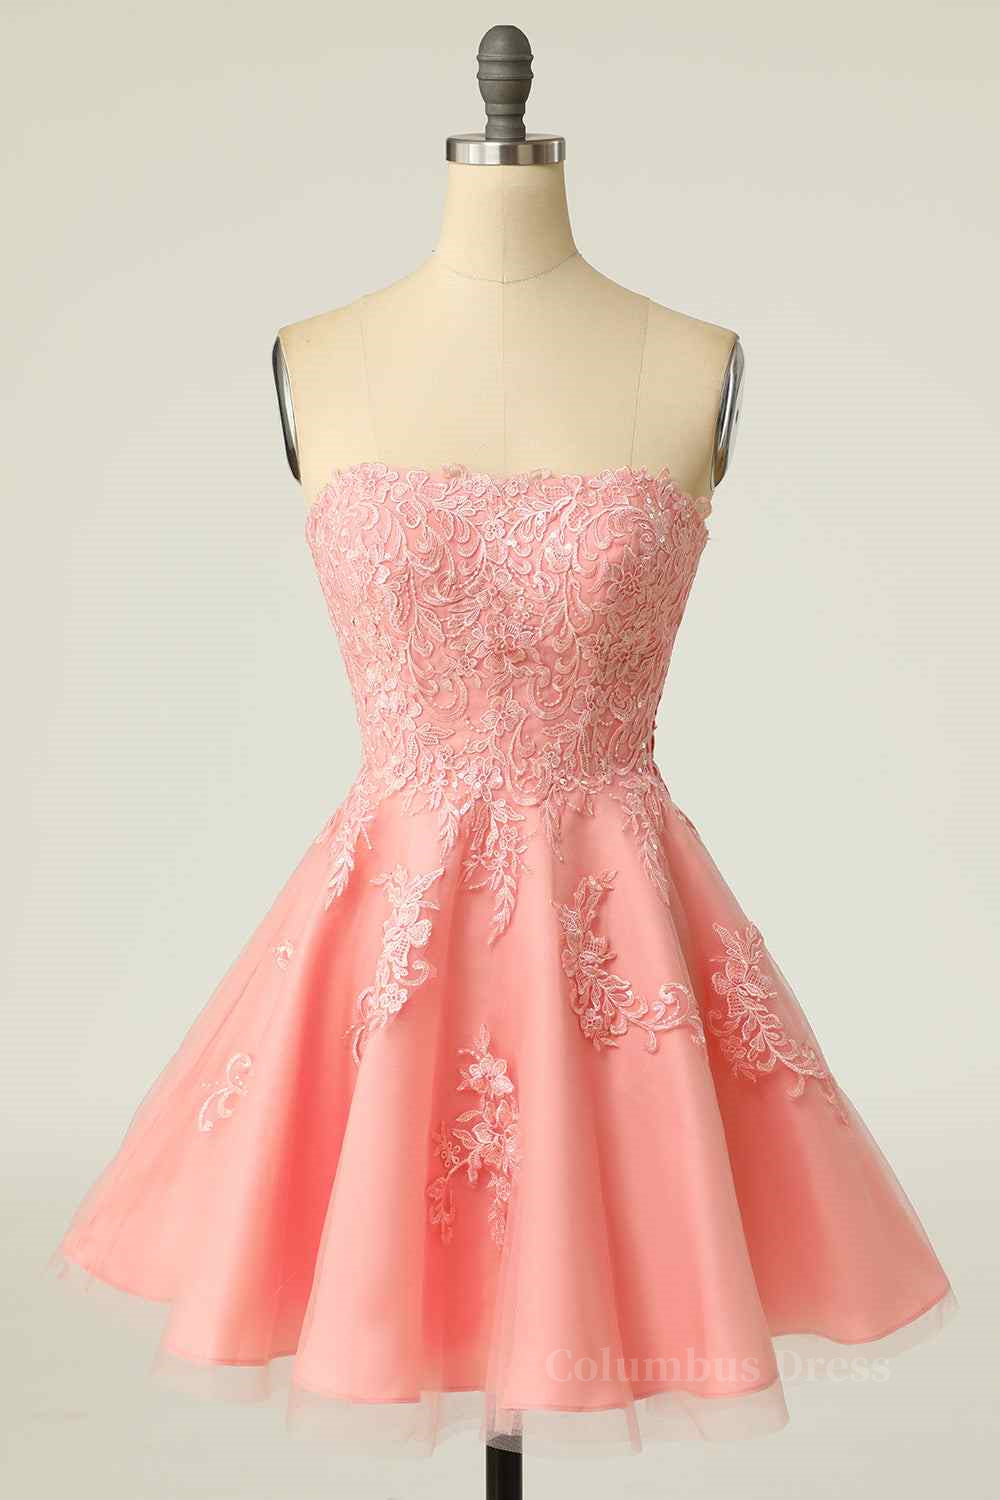 Pink A-line Strapless Lace-Up Back Applique Tulle Mini Corset Homecoming Dress outfit, Tights Dress Outfit